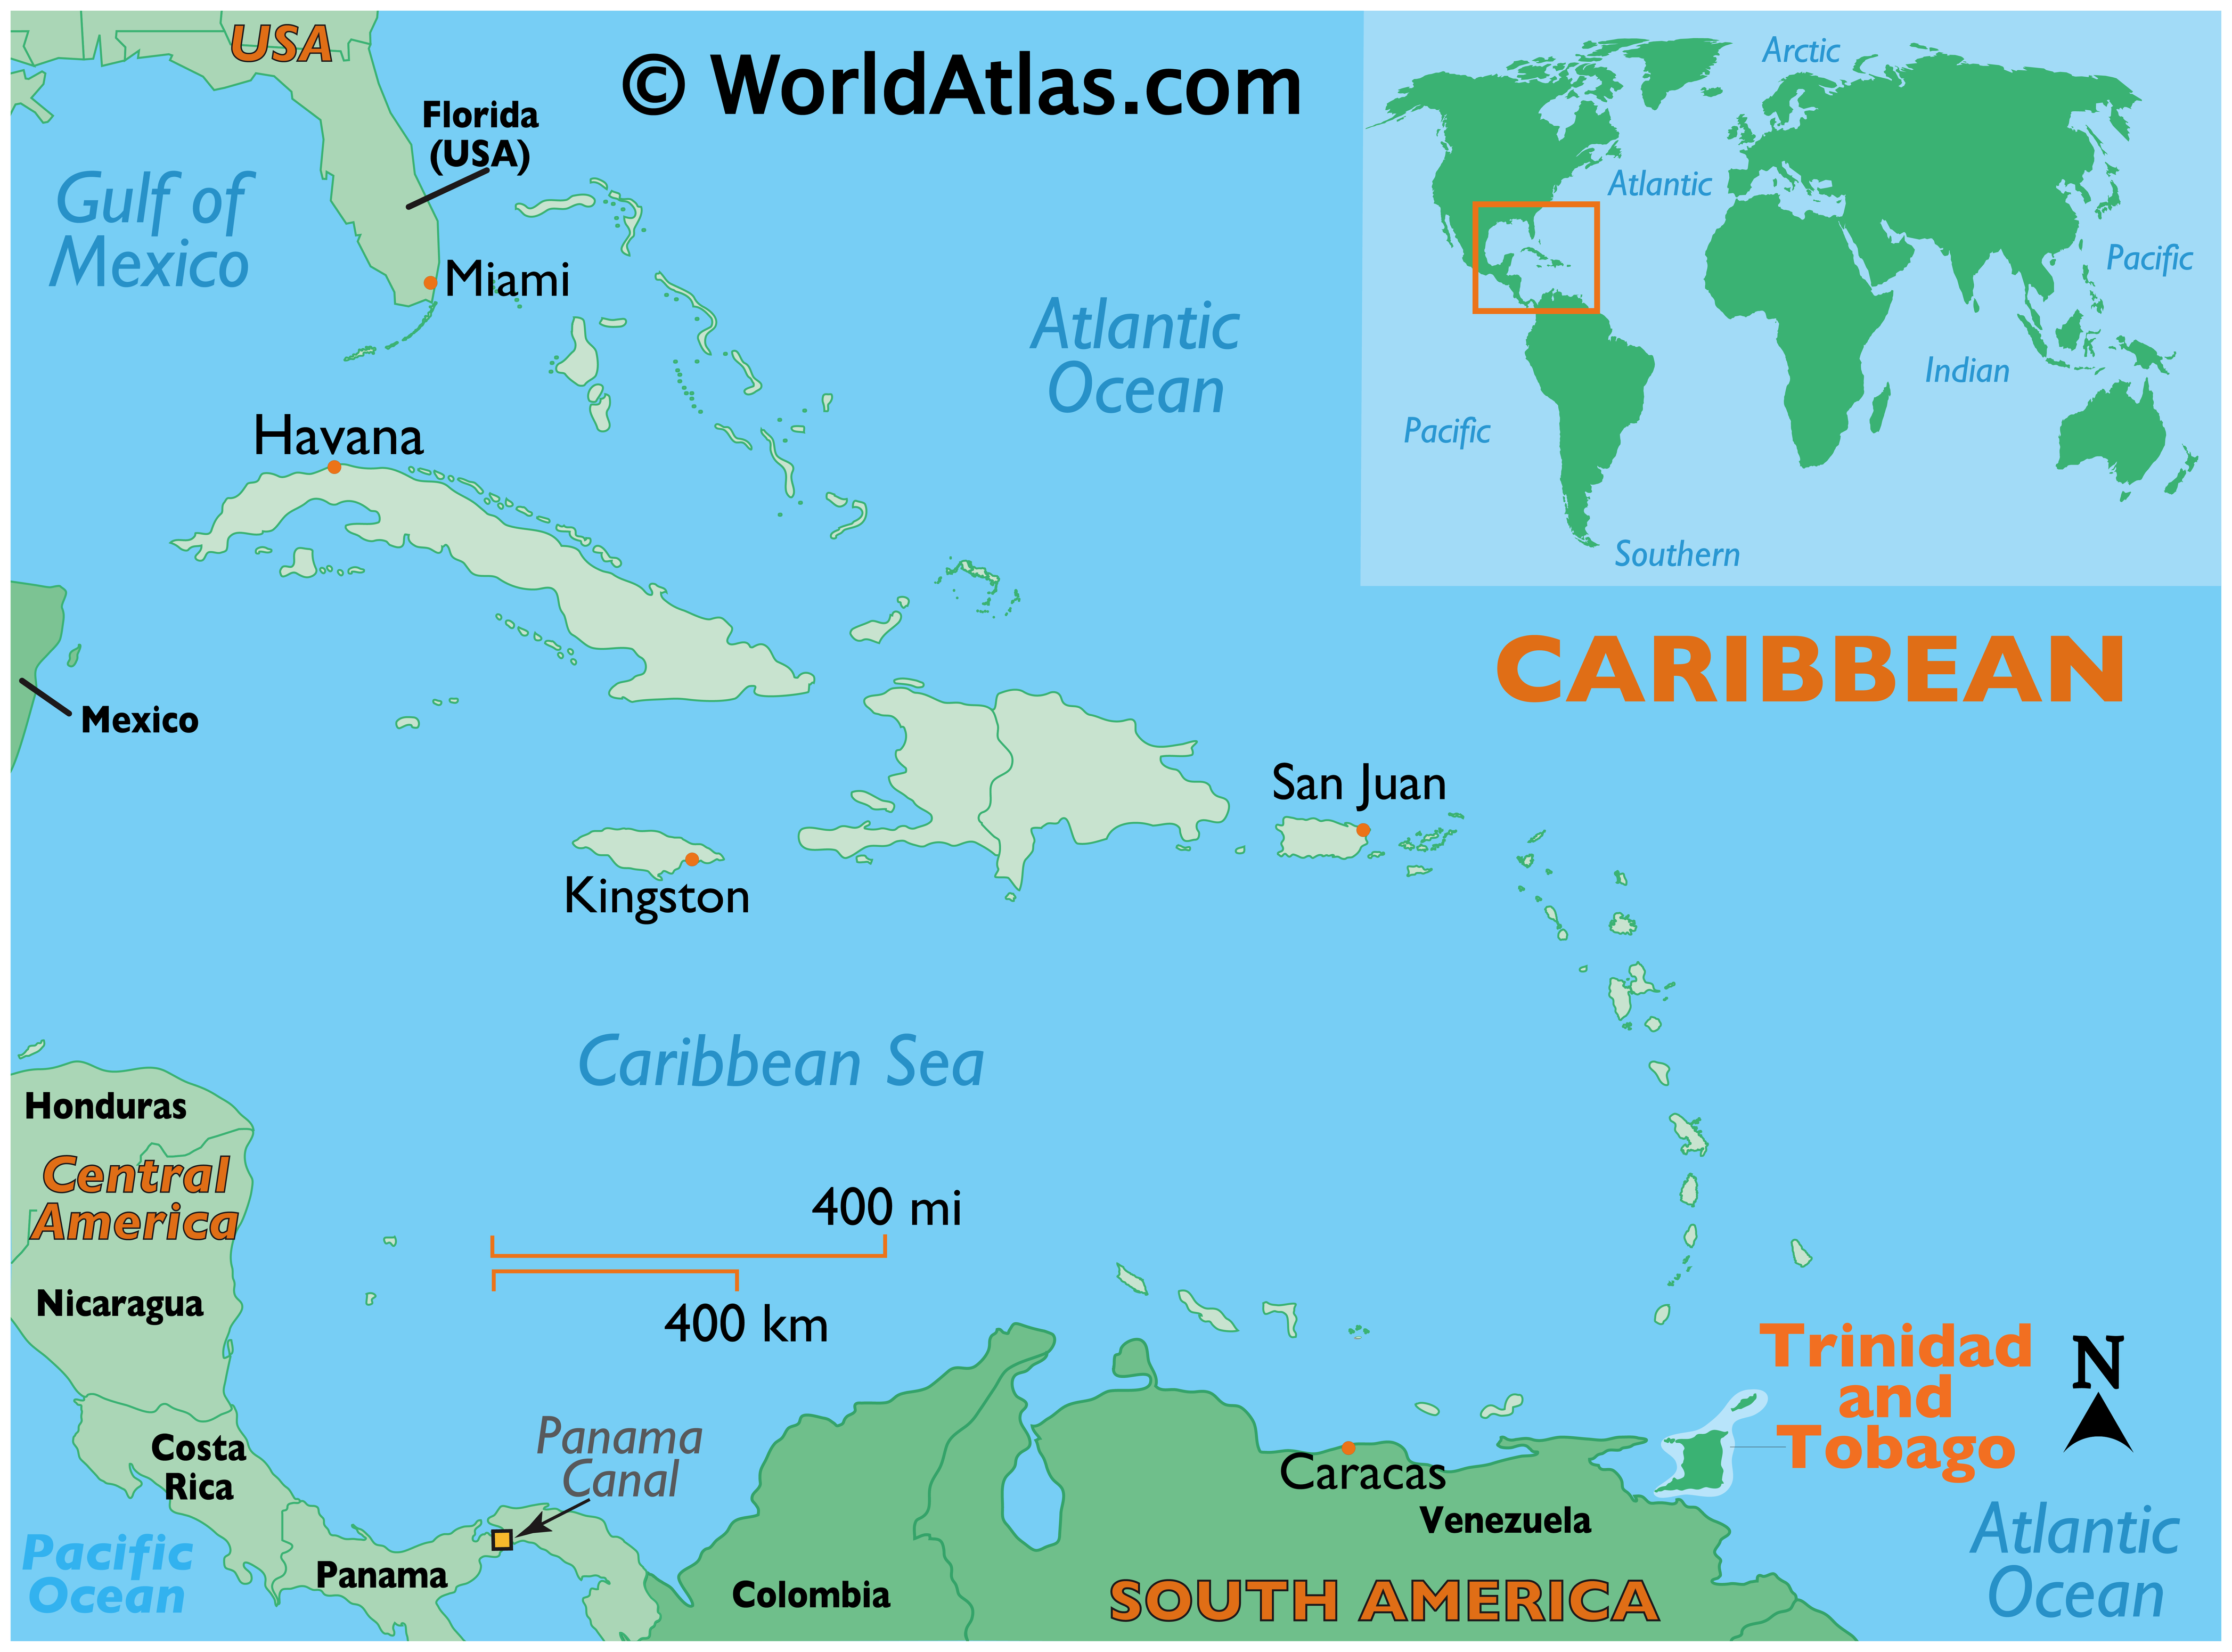 where is trinidad and tobago located on the world map Trinidad And Tobago Map Geography Of Trinidad And Tobago Map where is trinidad and tobago located on the world map